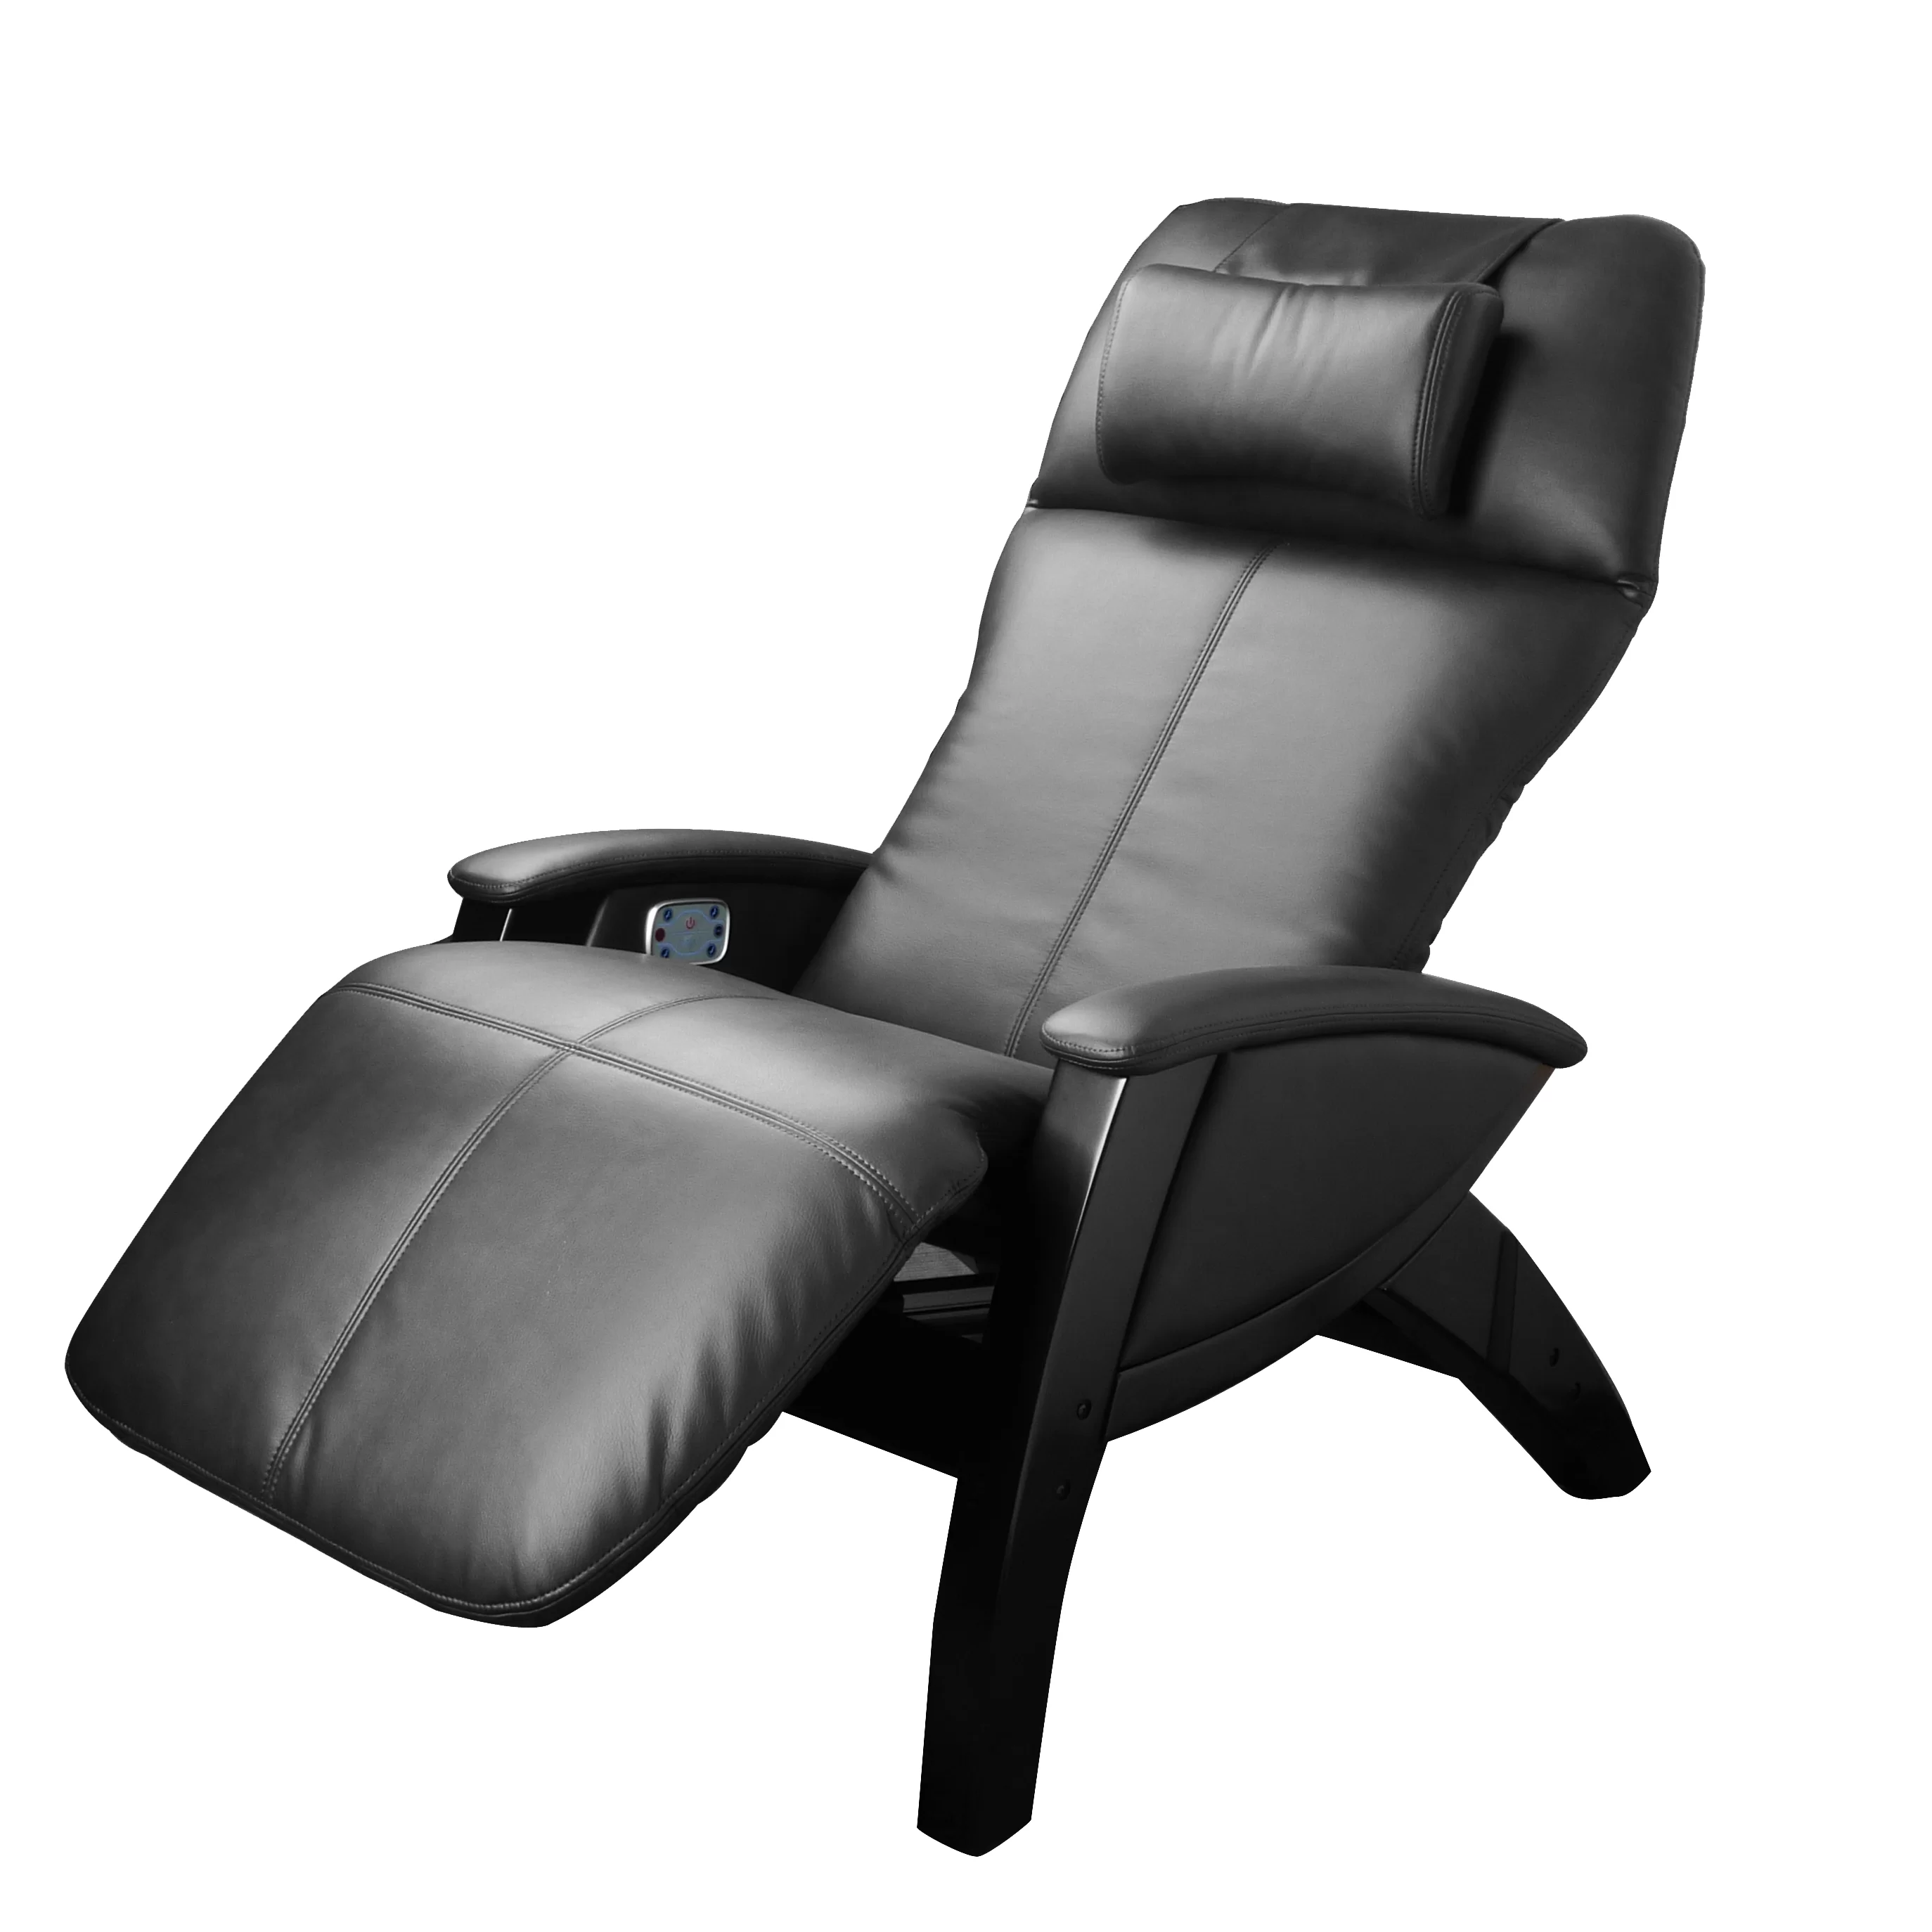 What Is A Zero Gravity Recliner